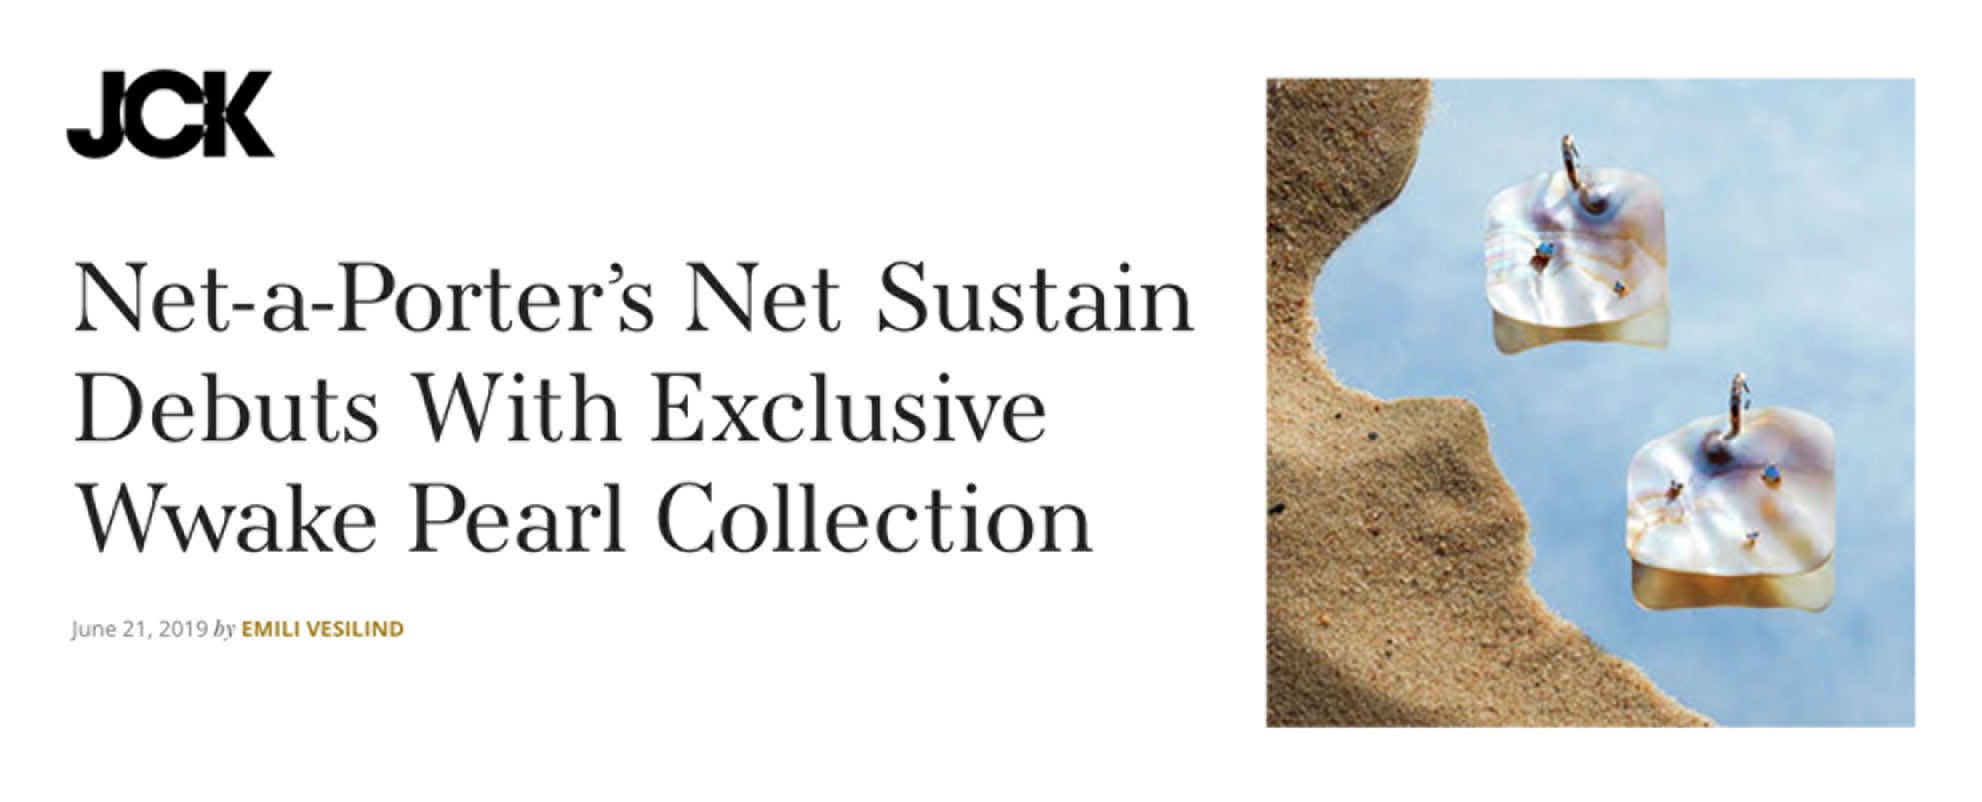 JCK | Net-a-Porter’s Net Sustain Debuts With Exclusive Wwake Pearl Collection | Emili Vesilind